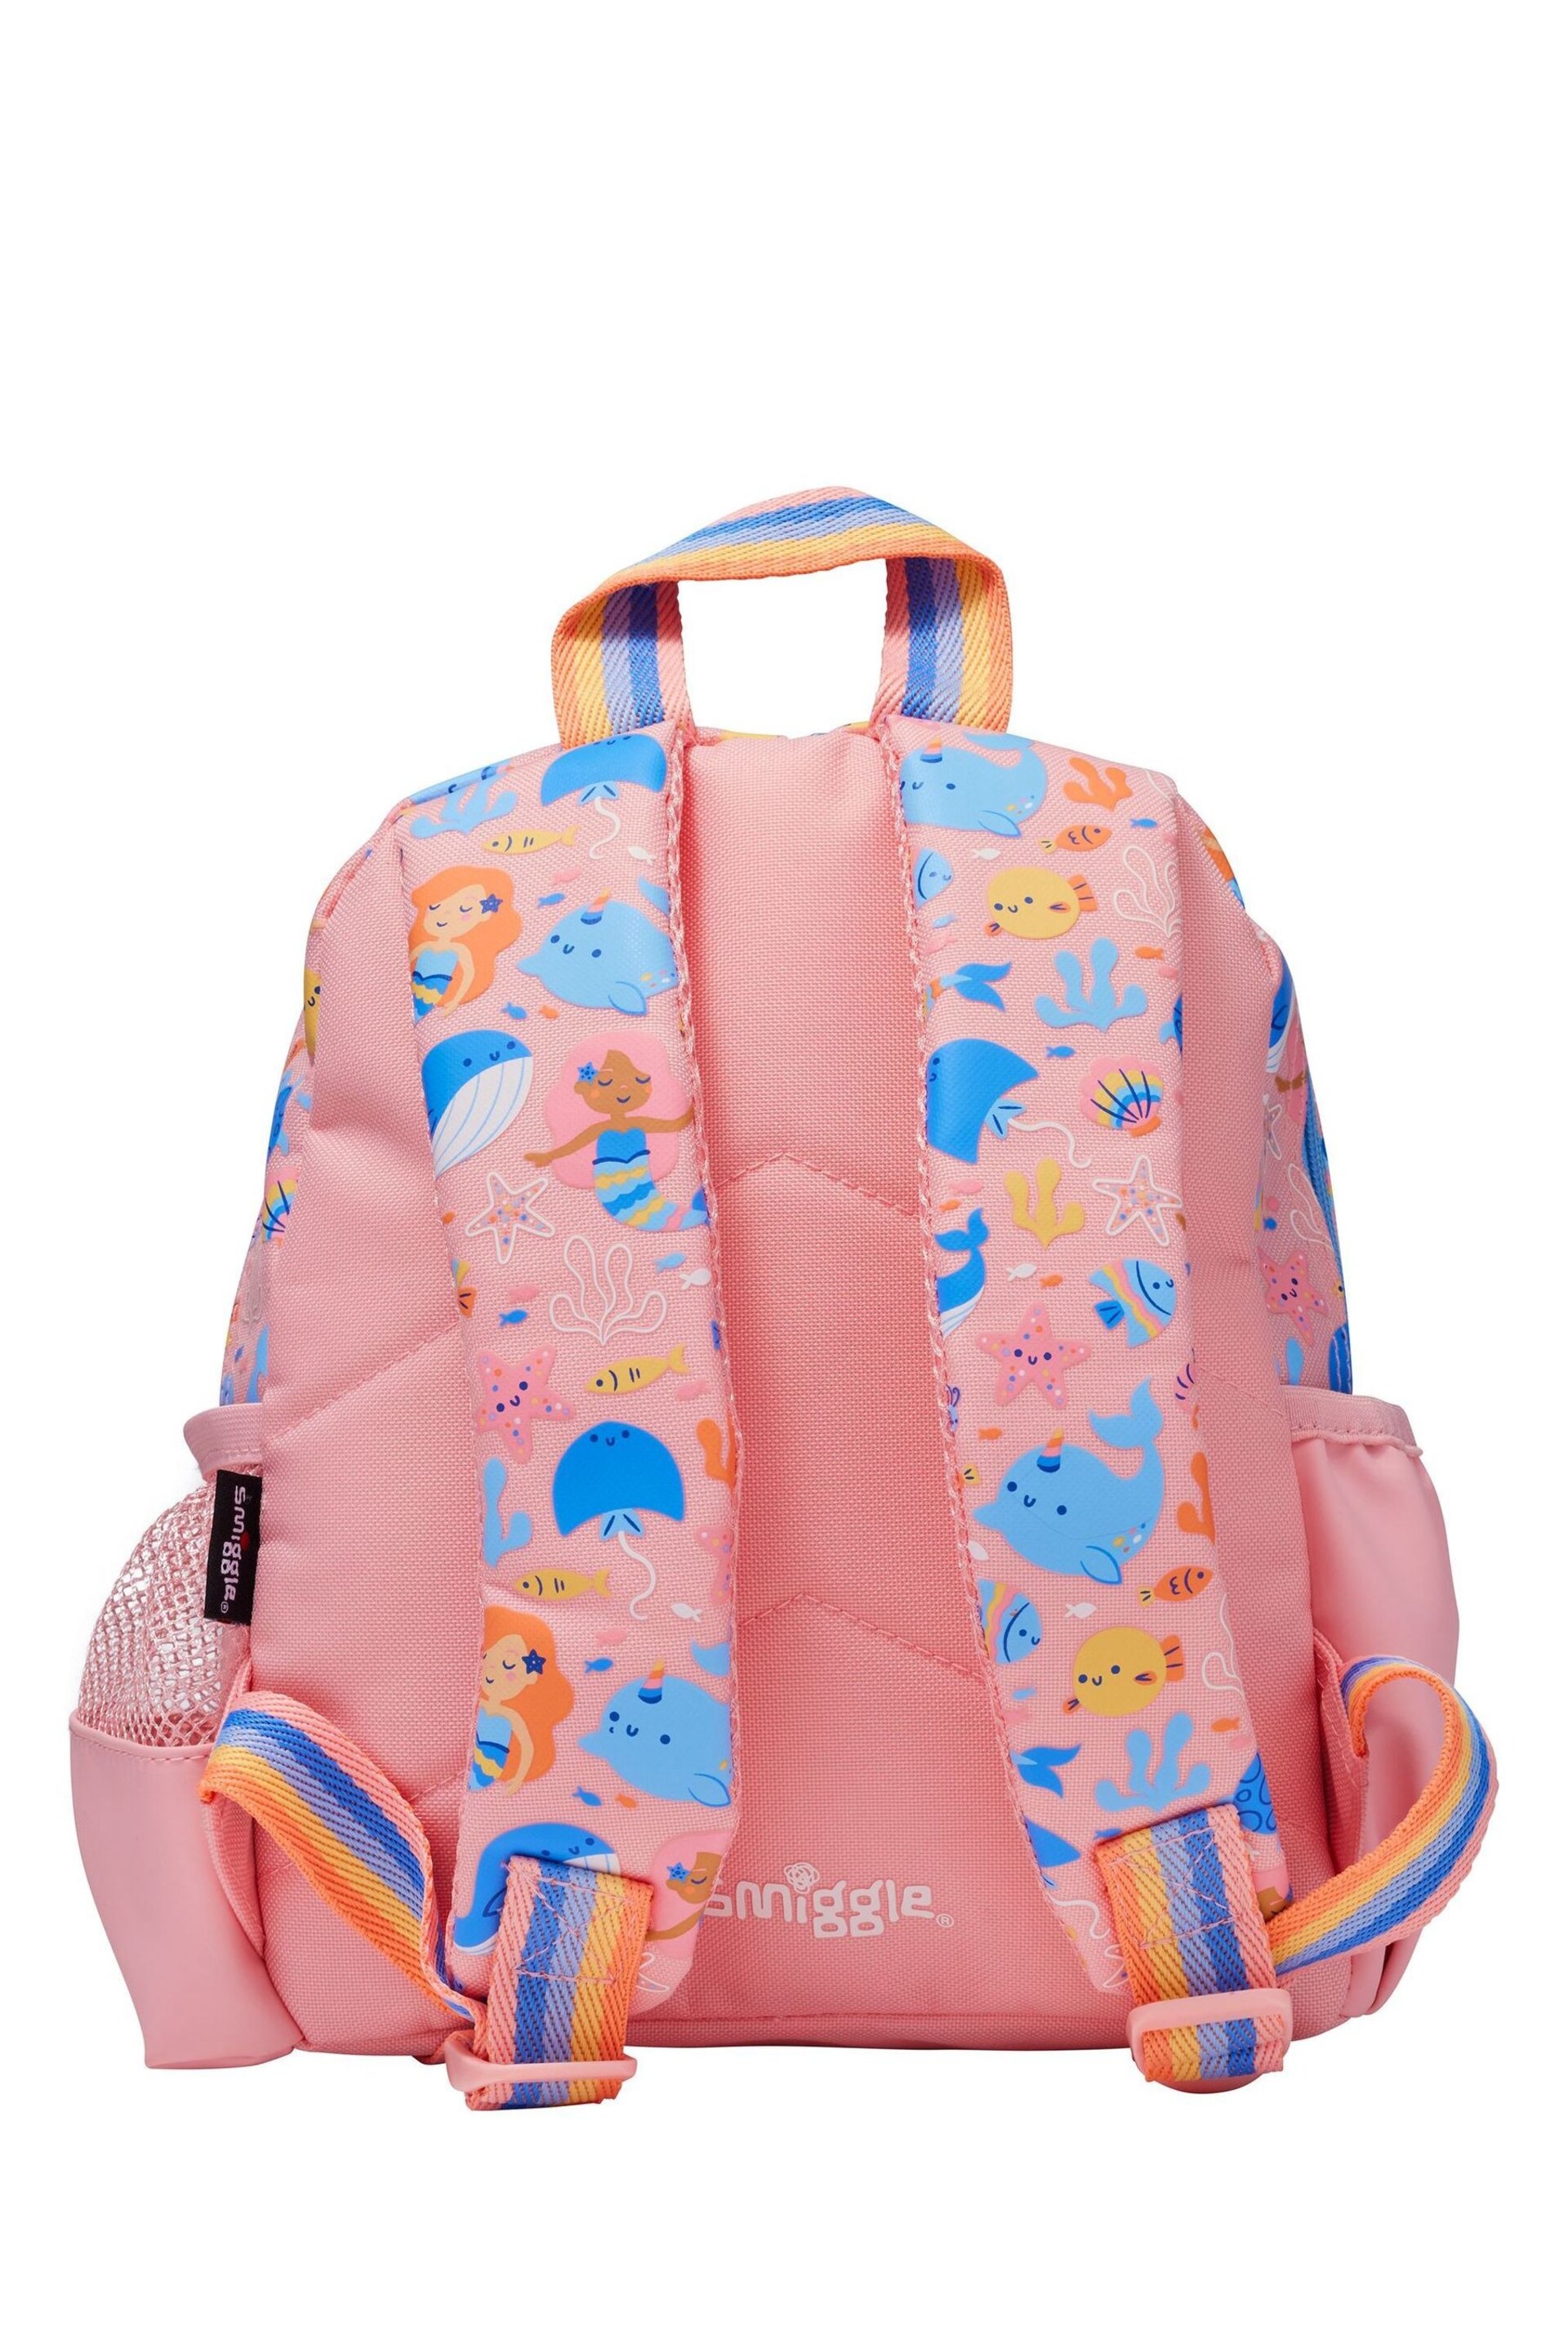 Smiggle Pink Over and Under Teeny Tiny Backpack - Image 4 of 4